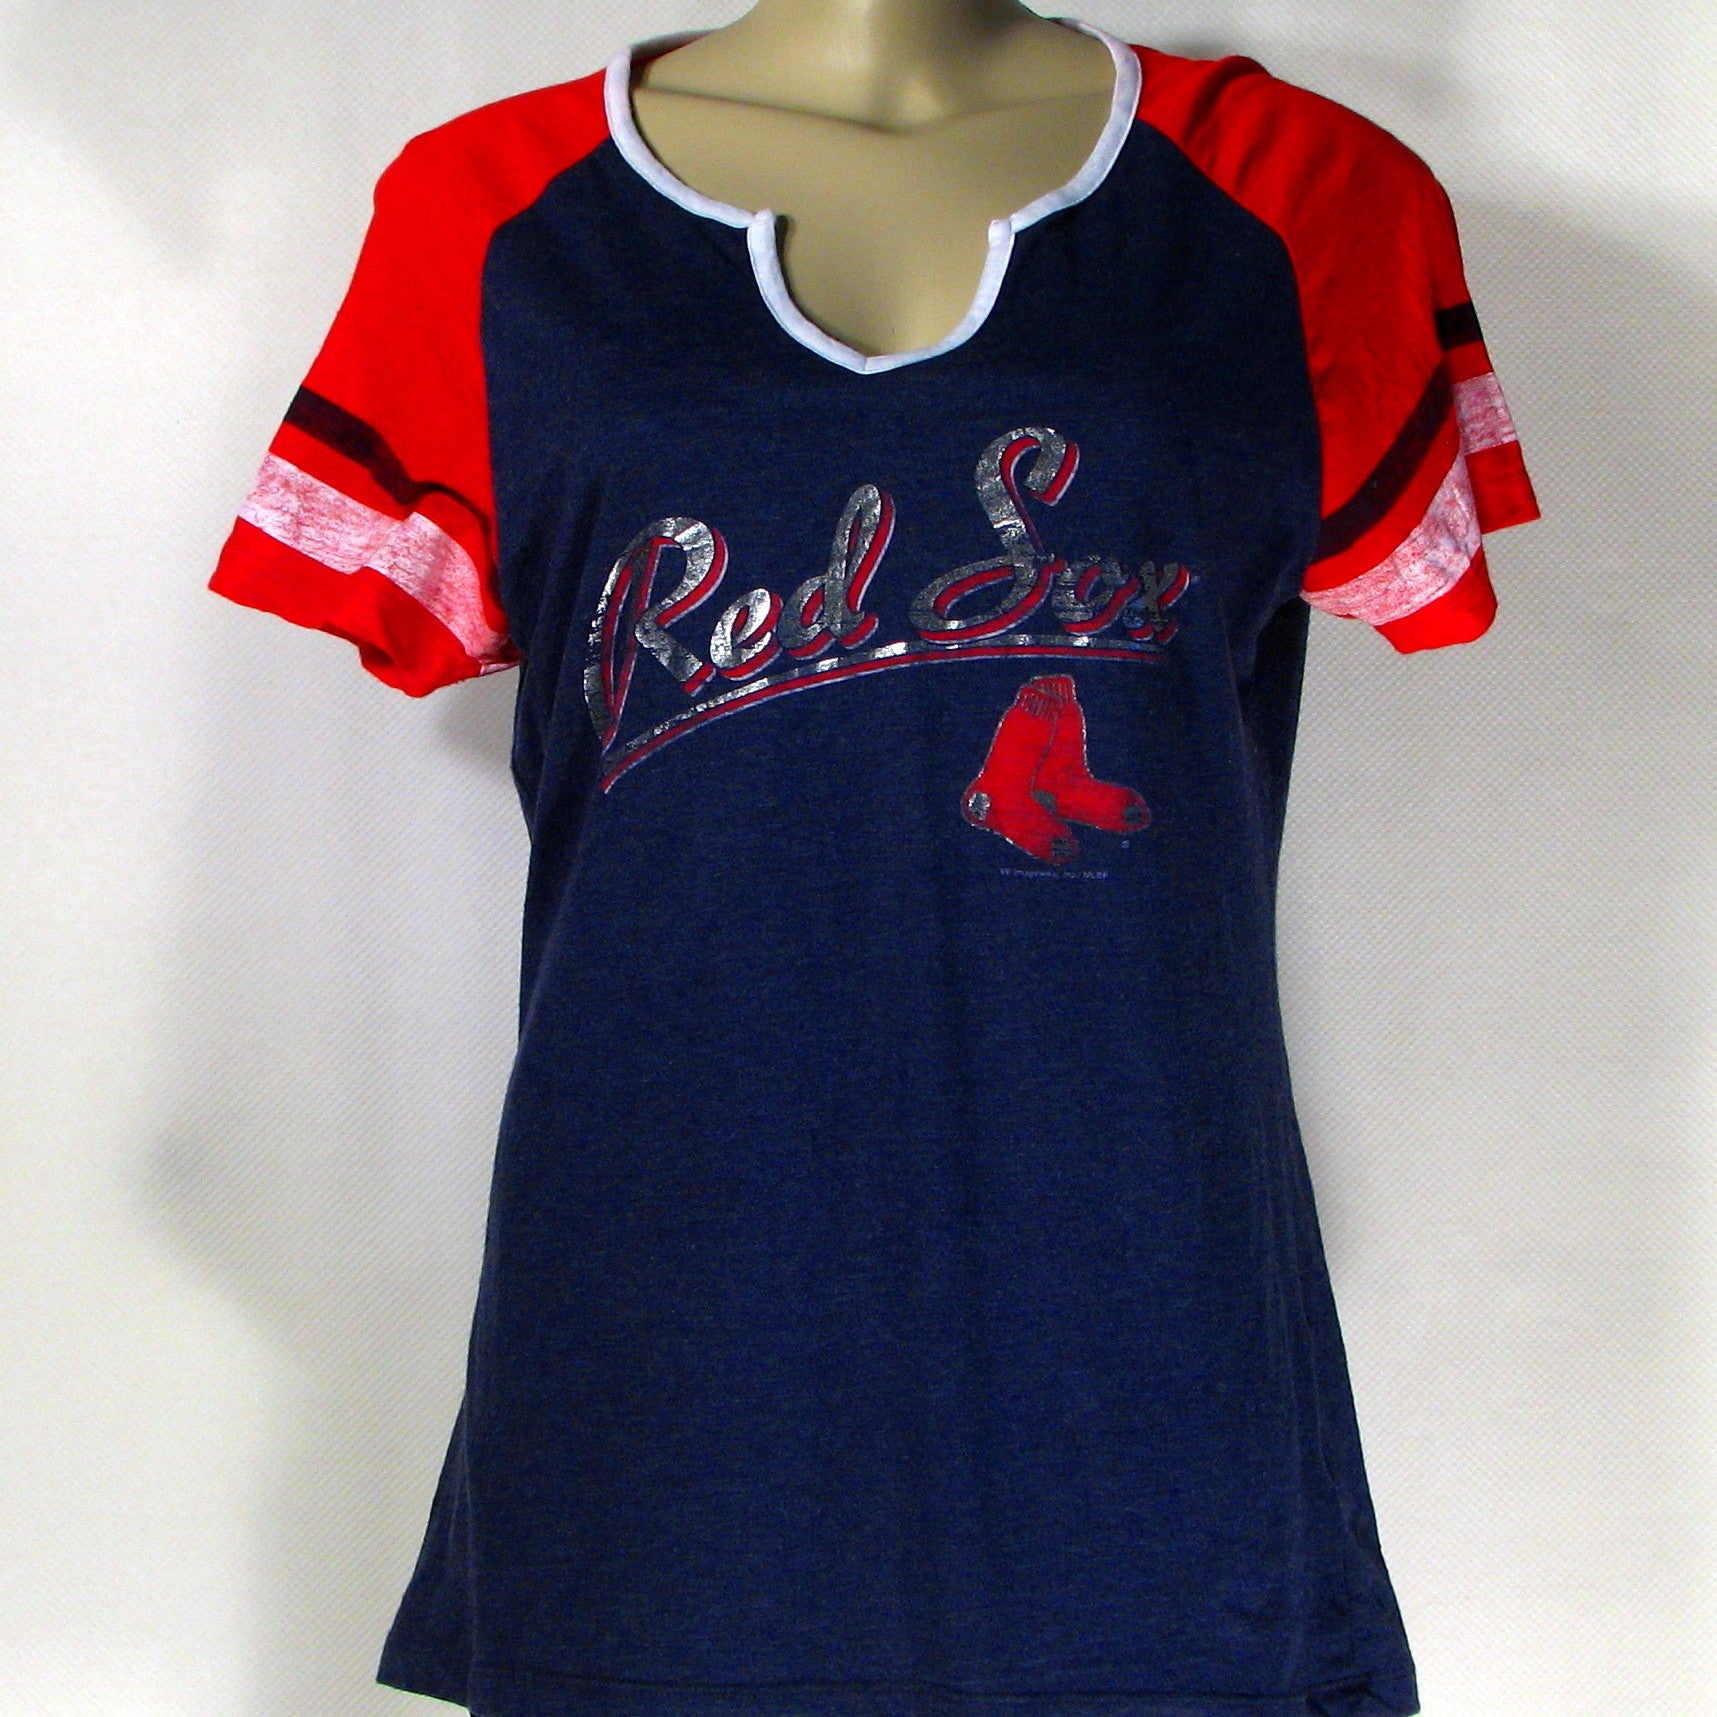 red sox ladies t shirts